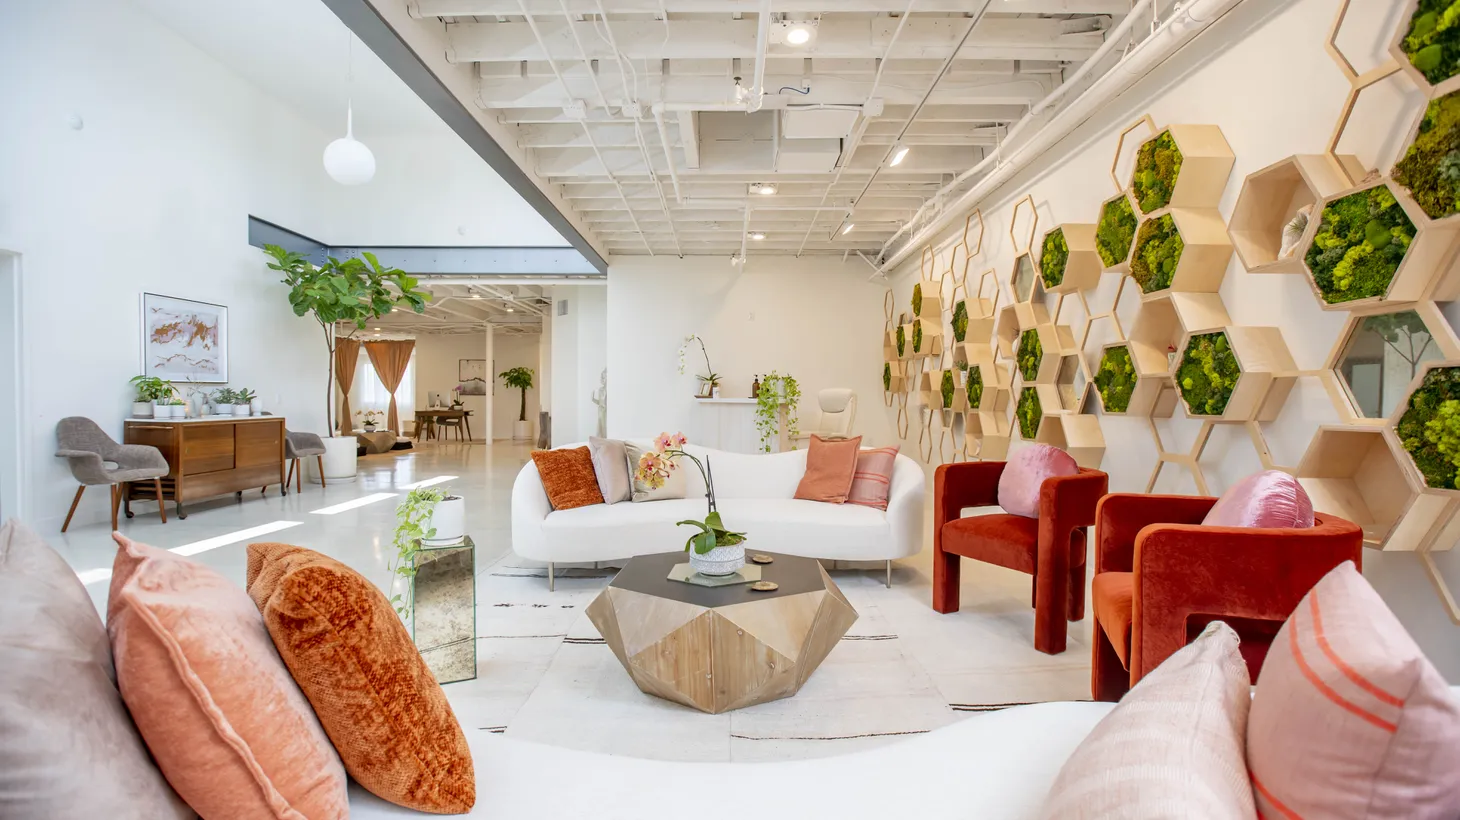 The reception area at Field Trip Health in Santa Monica is decorated with a geometric theme inspired by the symbols and shapes repeated in nature. The company operates a dozen clinics offering psychedelic-assisted therapy across the U.S., Canada and Europe.